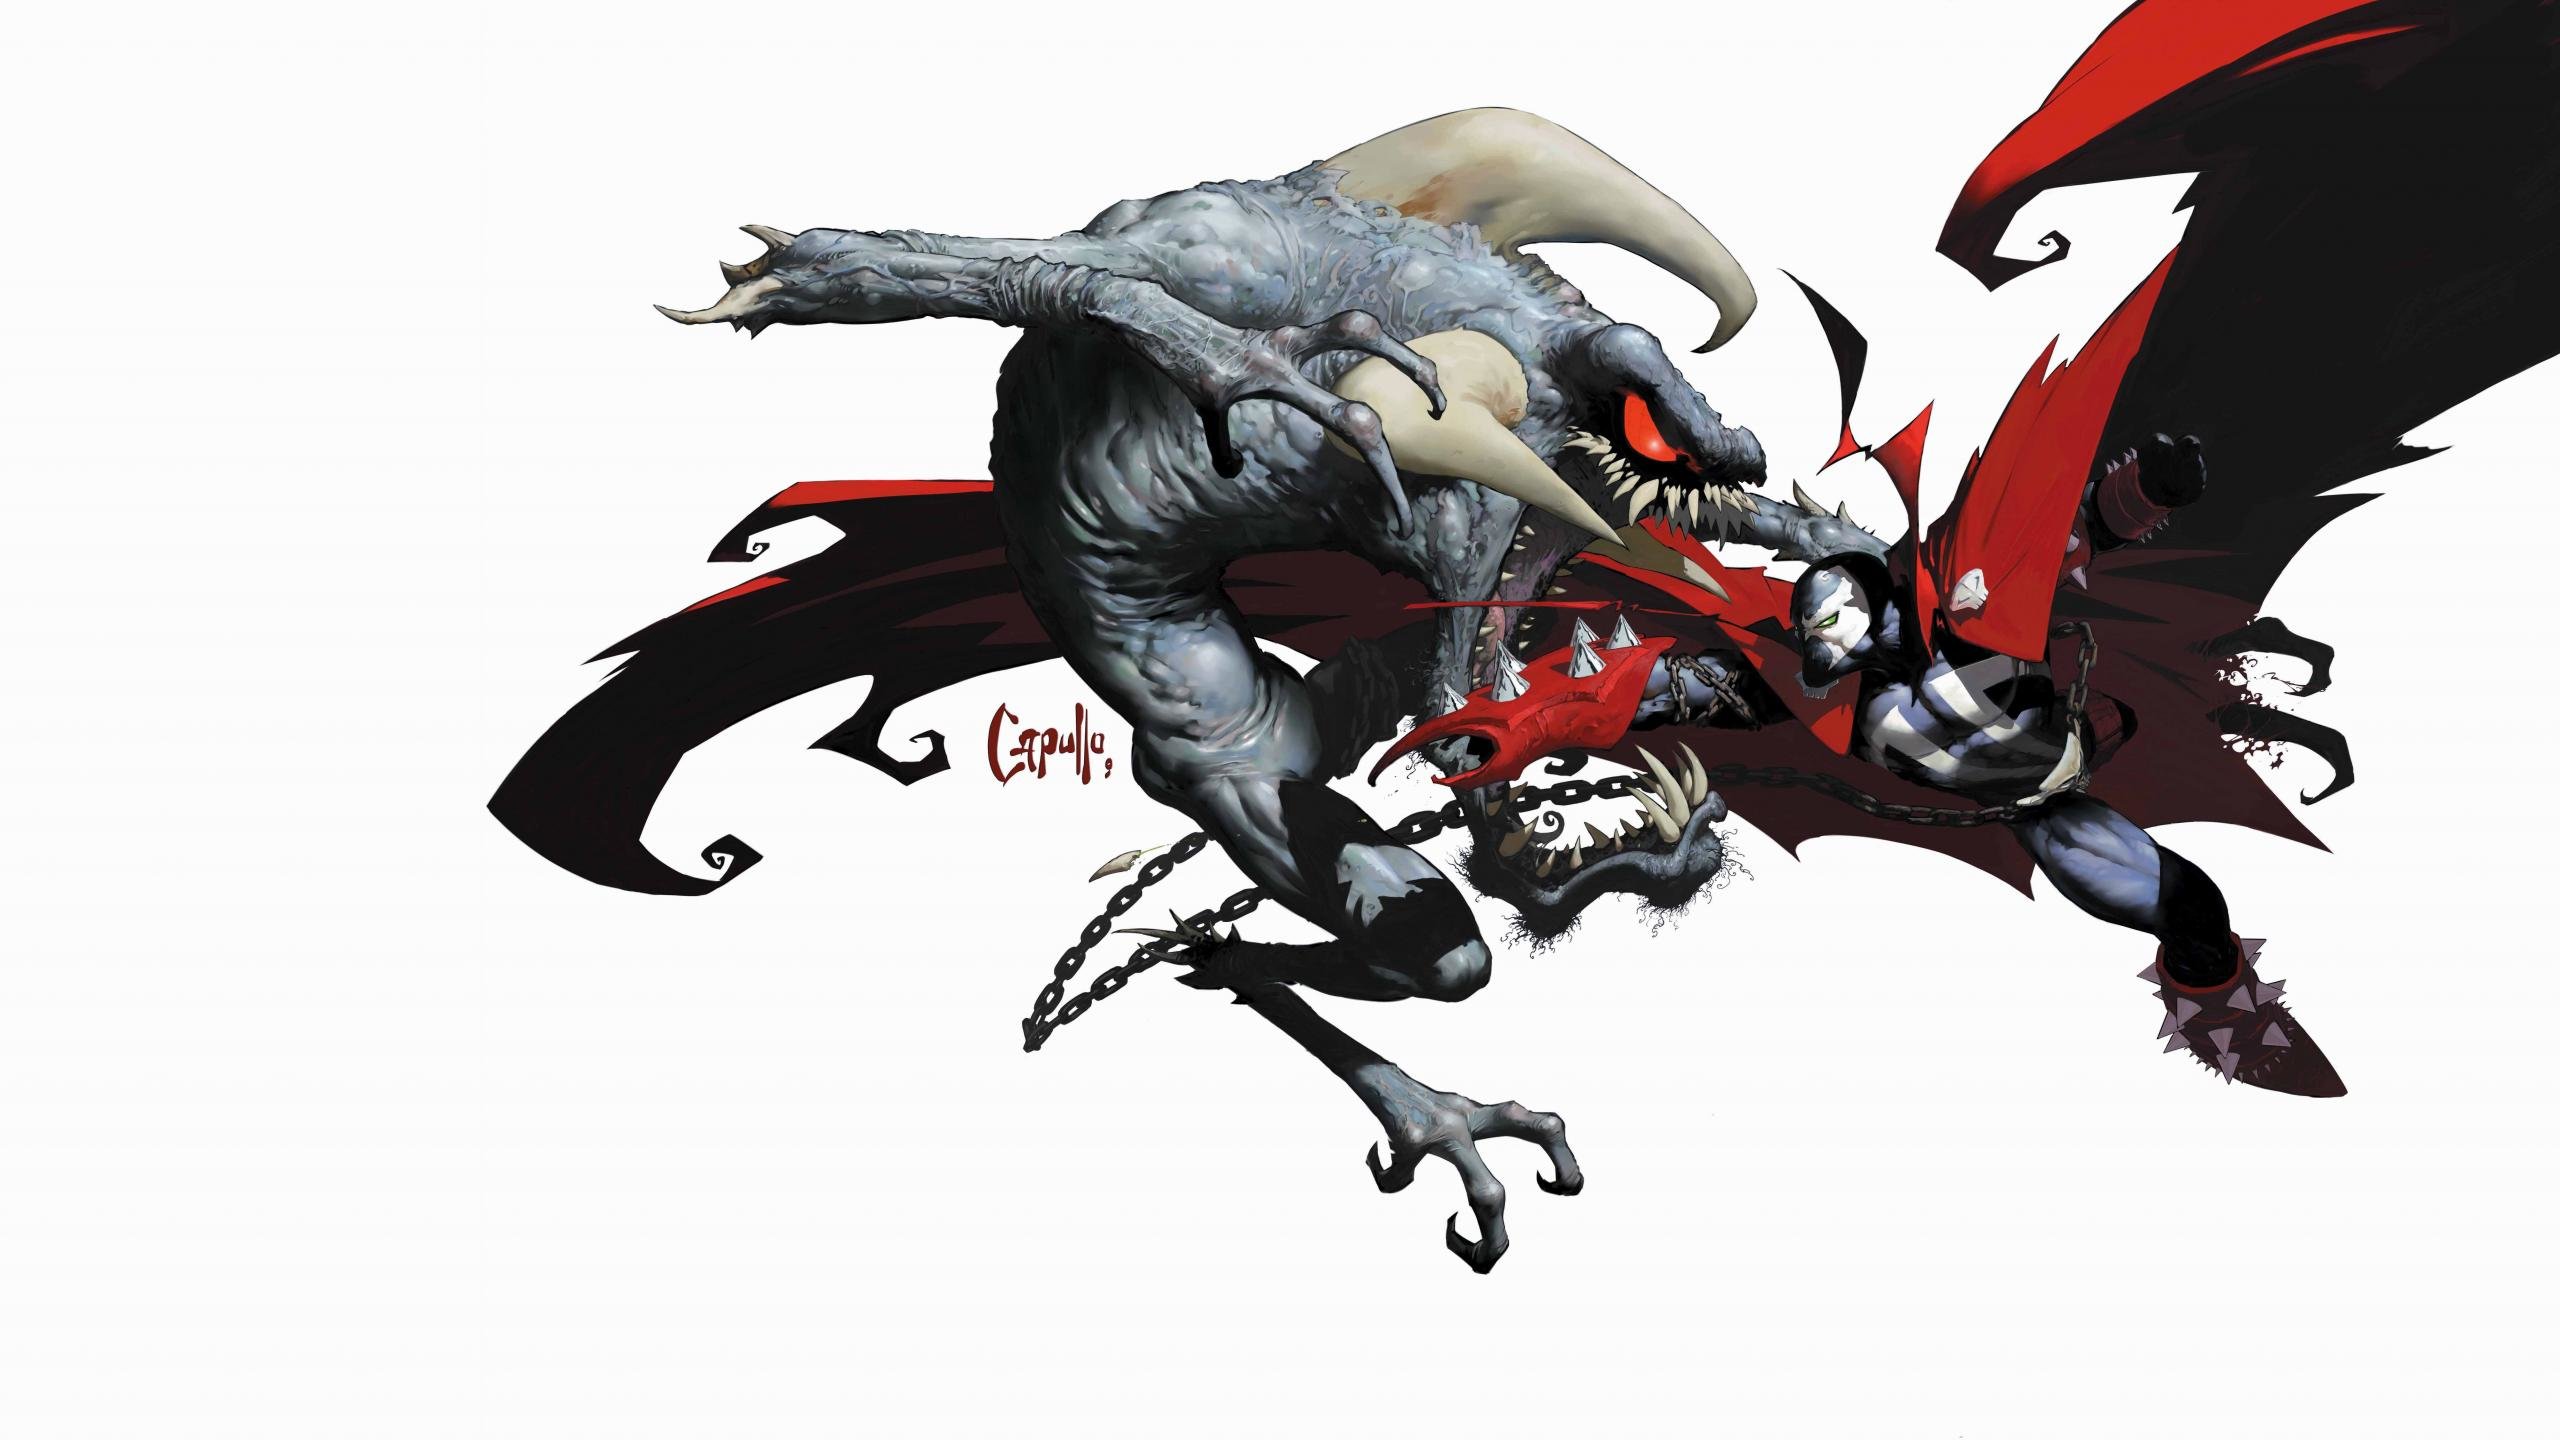 Awesome Spawn free wallpaper ID:114001 for hd 2560x1440 desktop